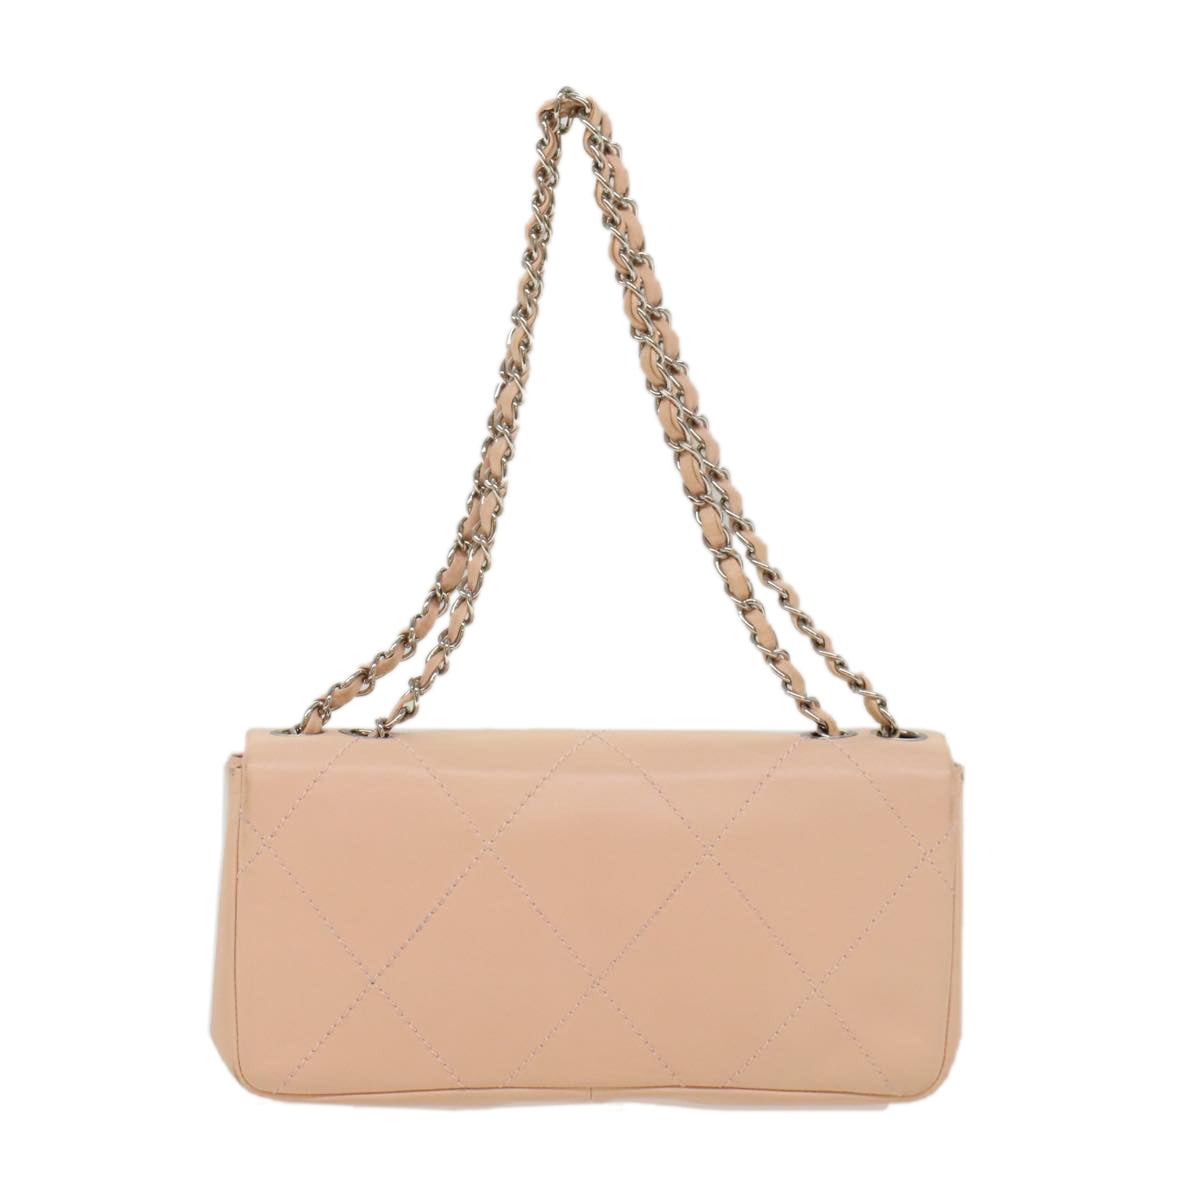 Chanel Matelasse Chain Shoulder Bag Leather Pink Cc Auth 53097